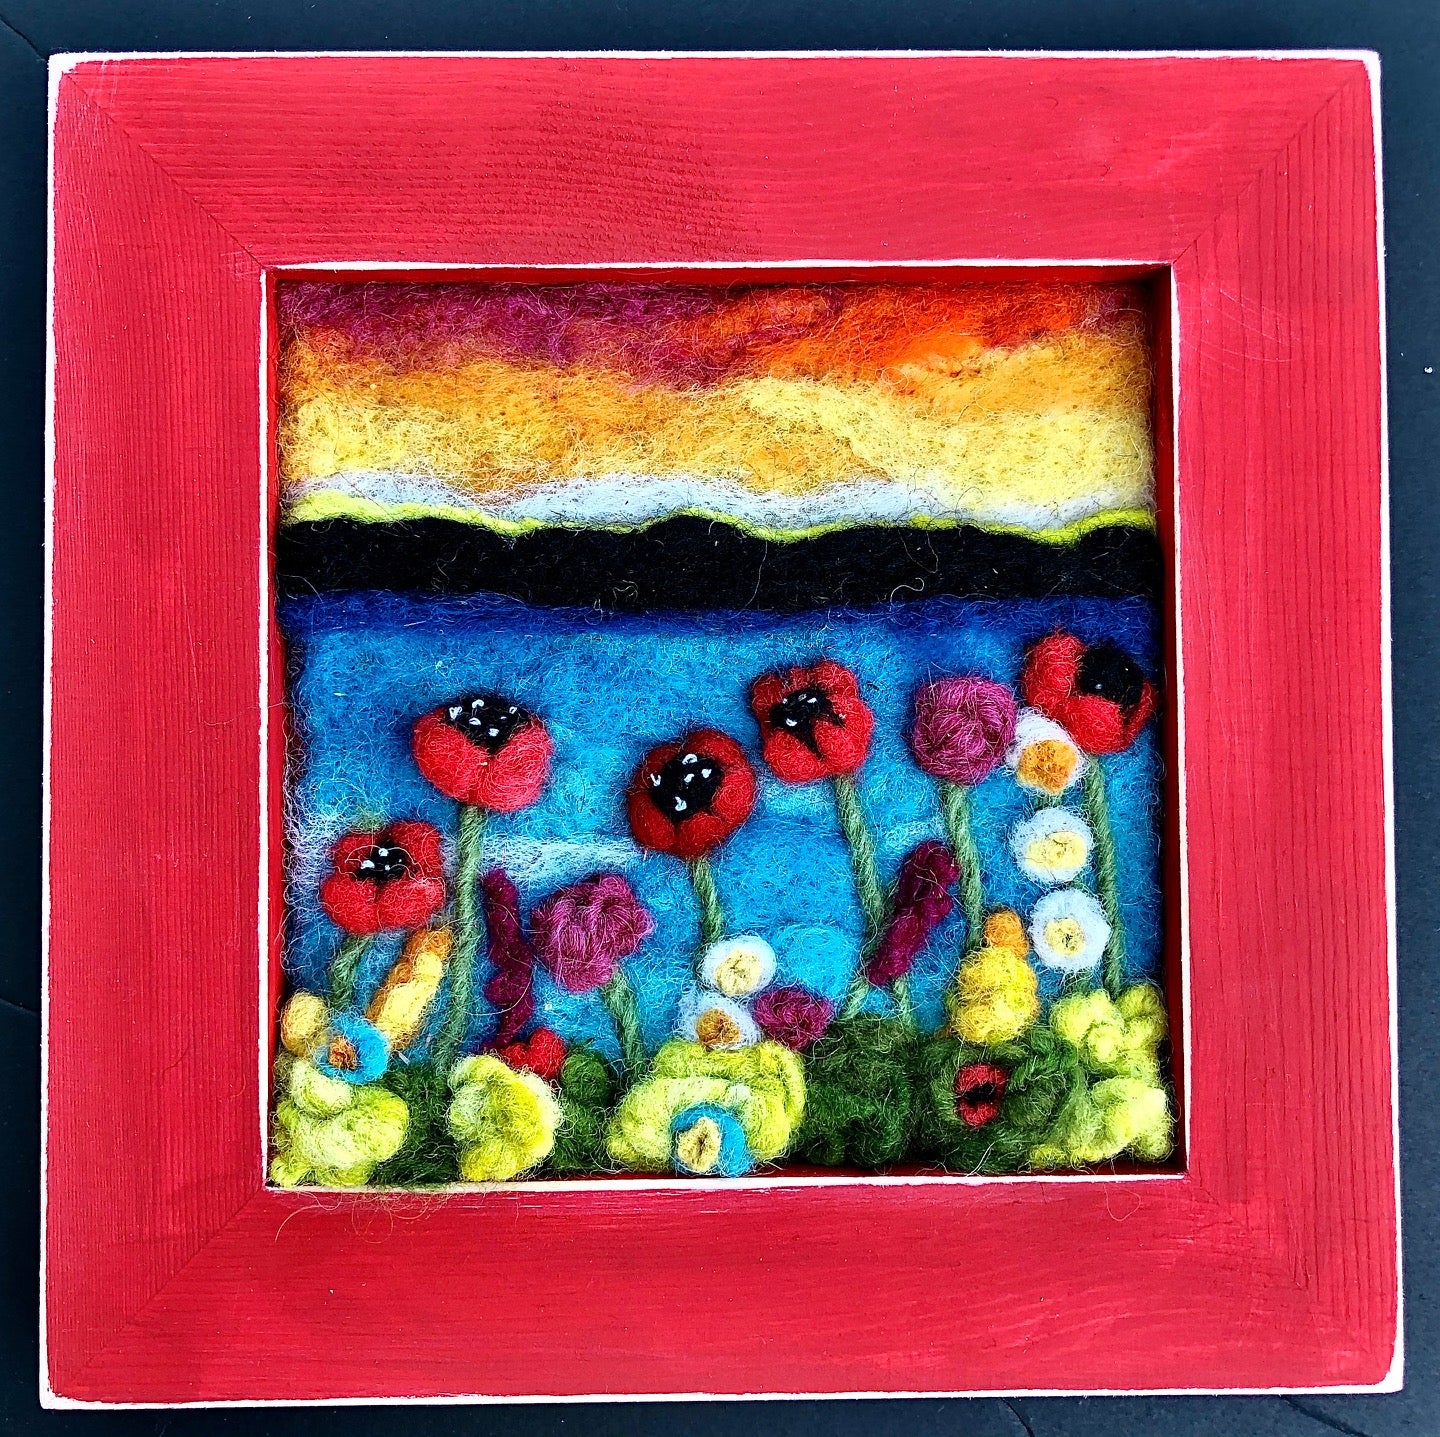 (SOLD) Poppies Sunset